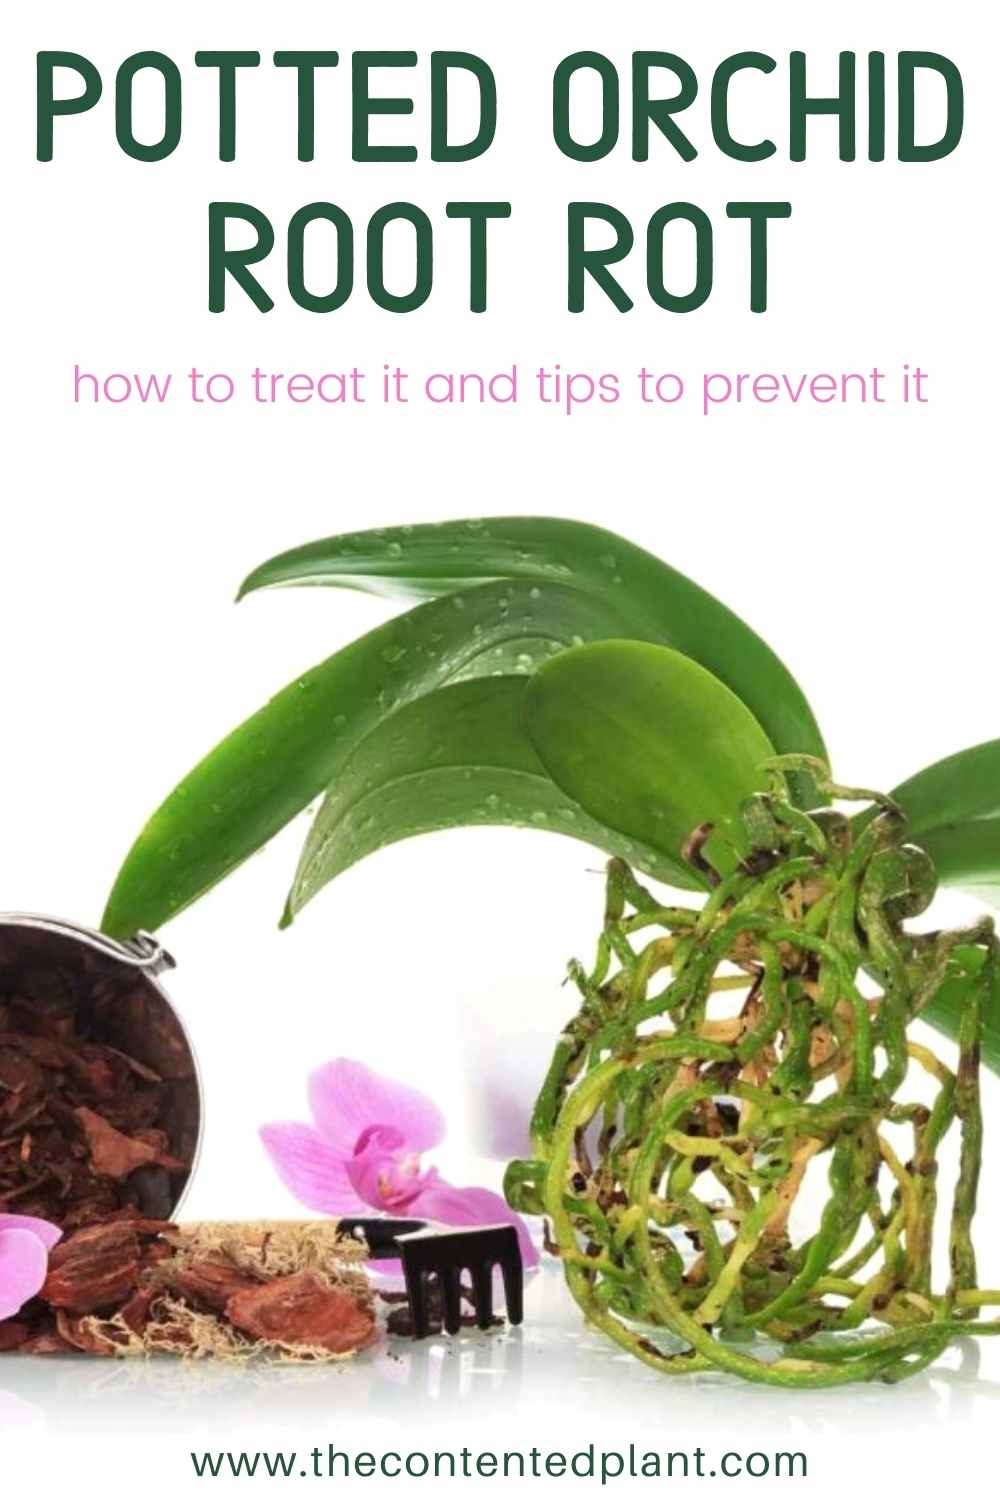 Potted orchid root rot-pin image